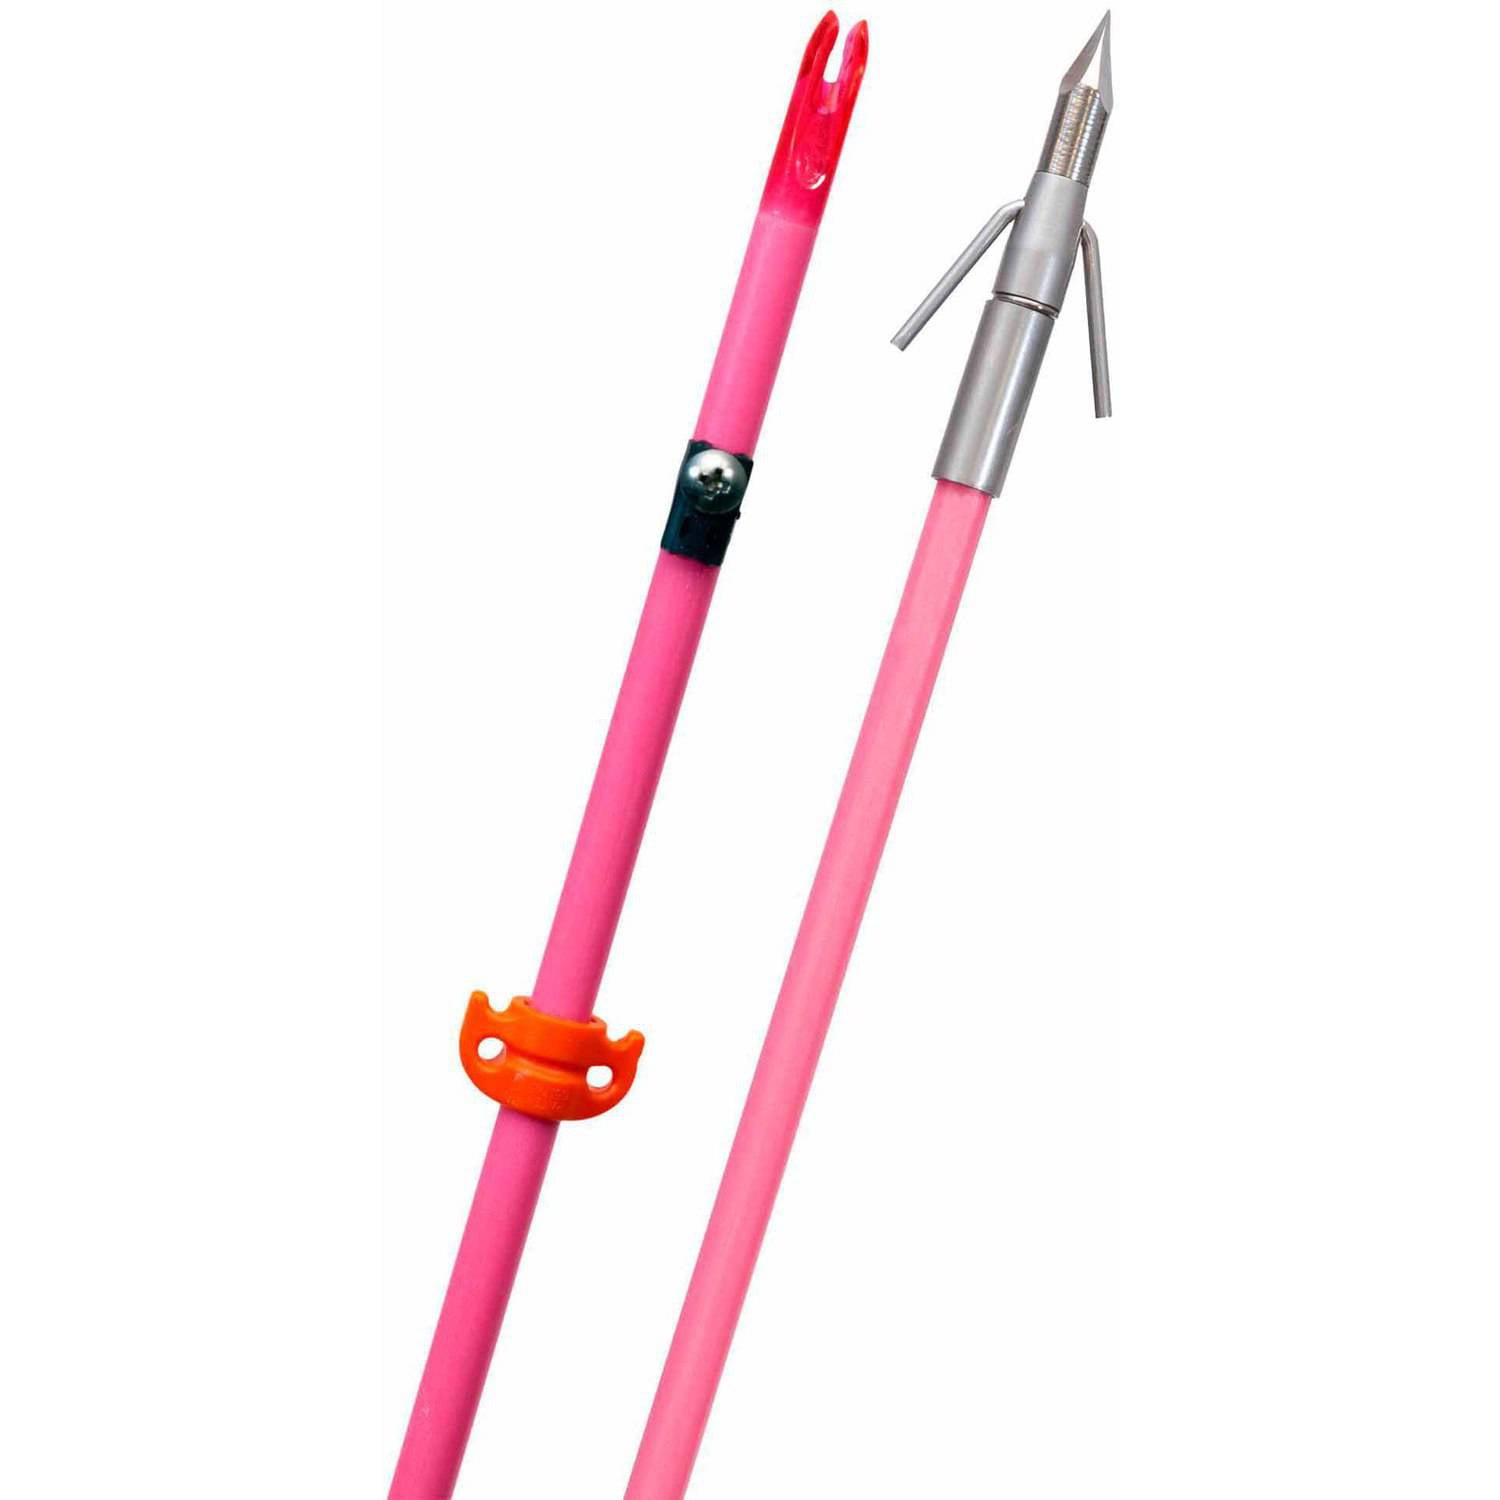 Raiderette Pro Bowfishing Arrow with Riptide Pro Point by Fin-Finder, Pink